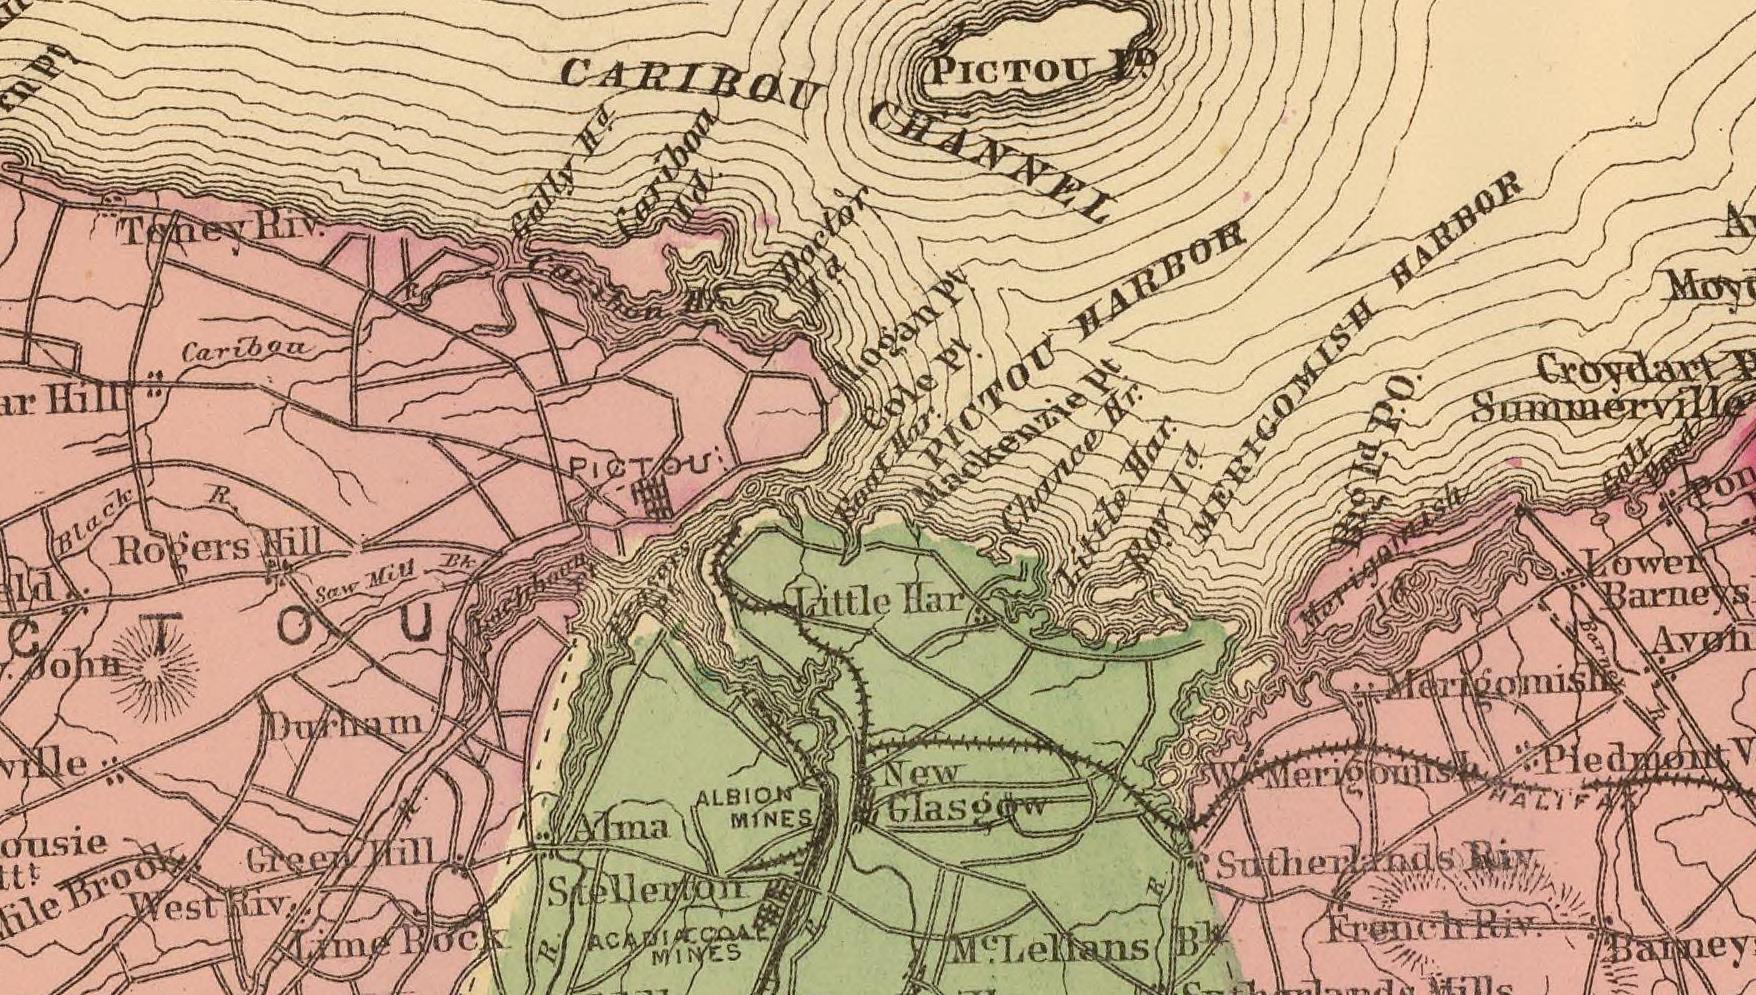 1878 Pictou County Map (clip)